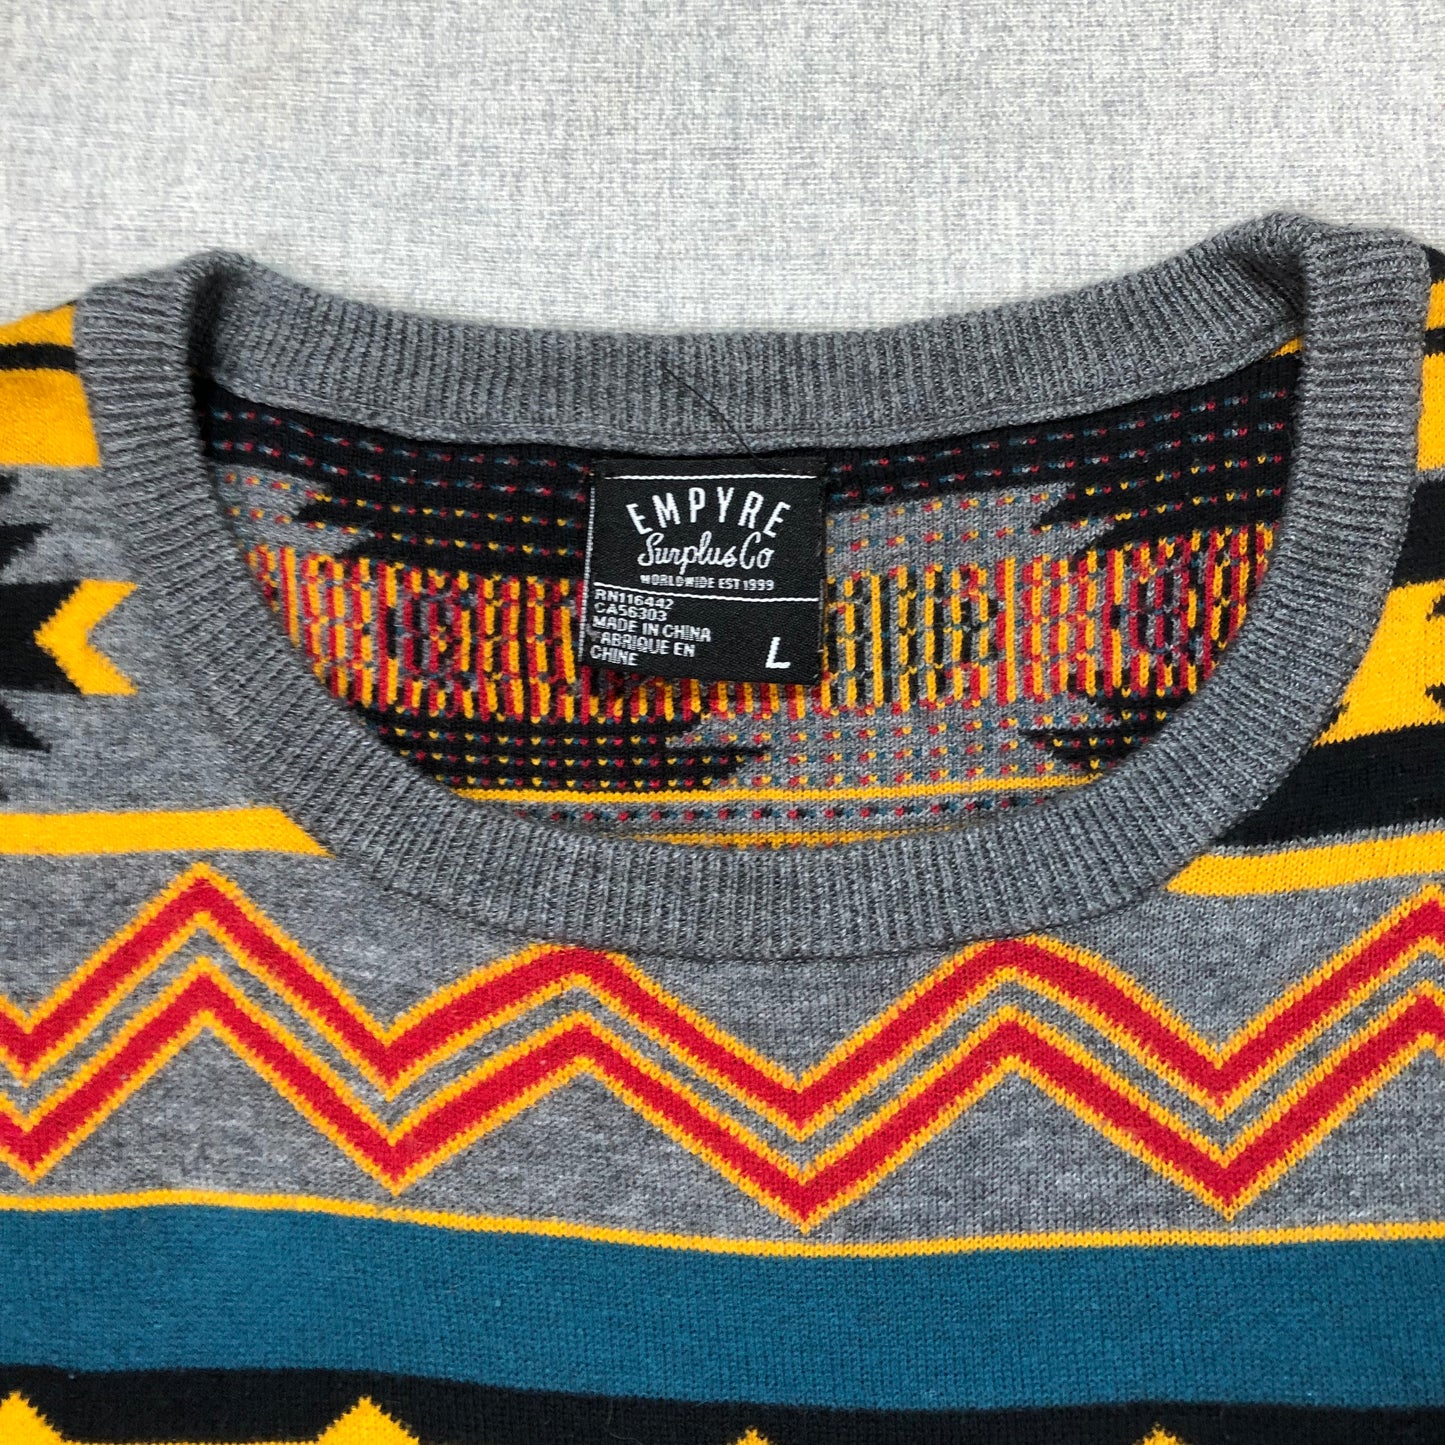 Empyre Surplus Co Sweater Mens L Southwestern Aztec Pattern Knit Colorful PREOWNED